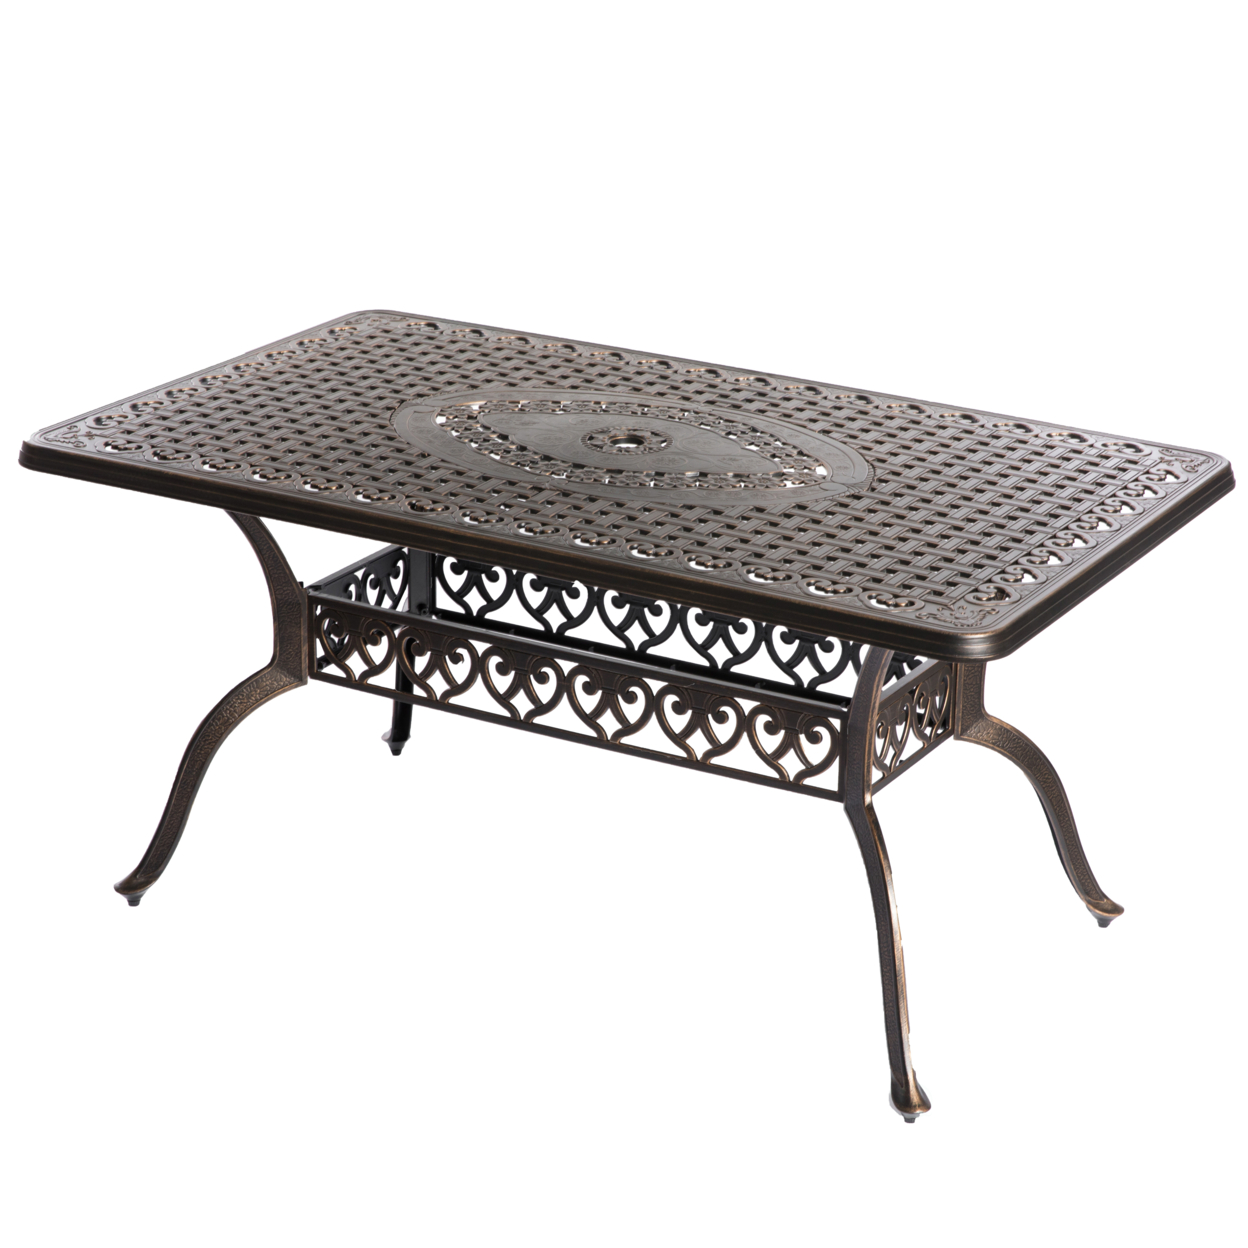 Indoor And Outdoor Bronze Dinning Set 6 Chairs With 1 Table Bistro Patio Cast Aluminum.